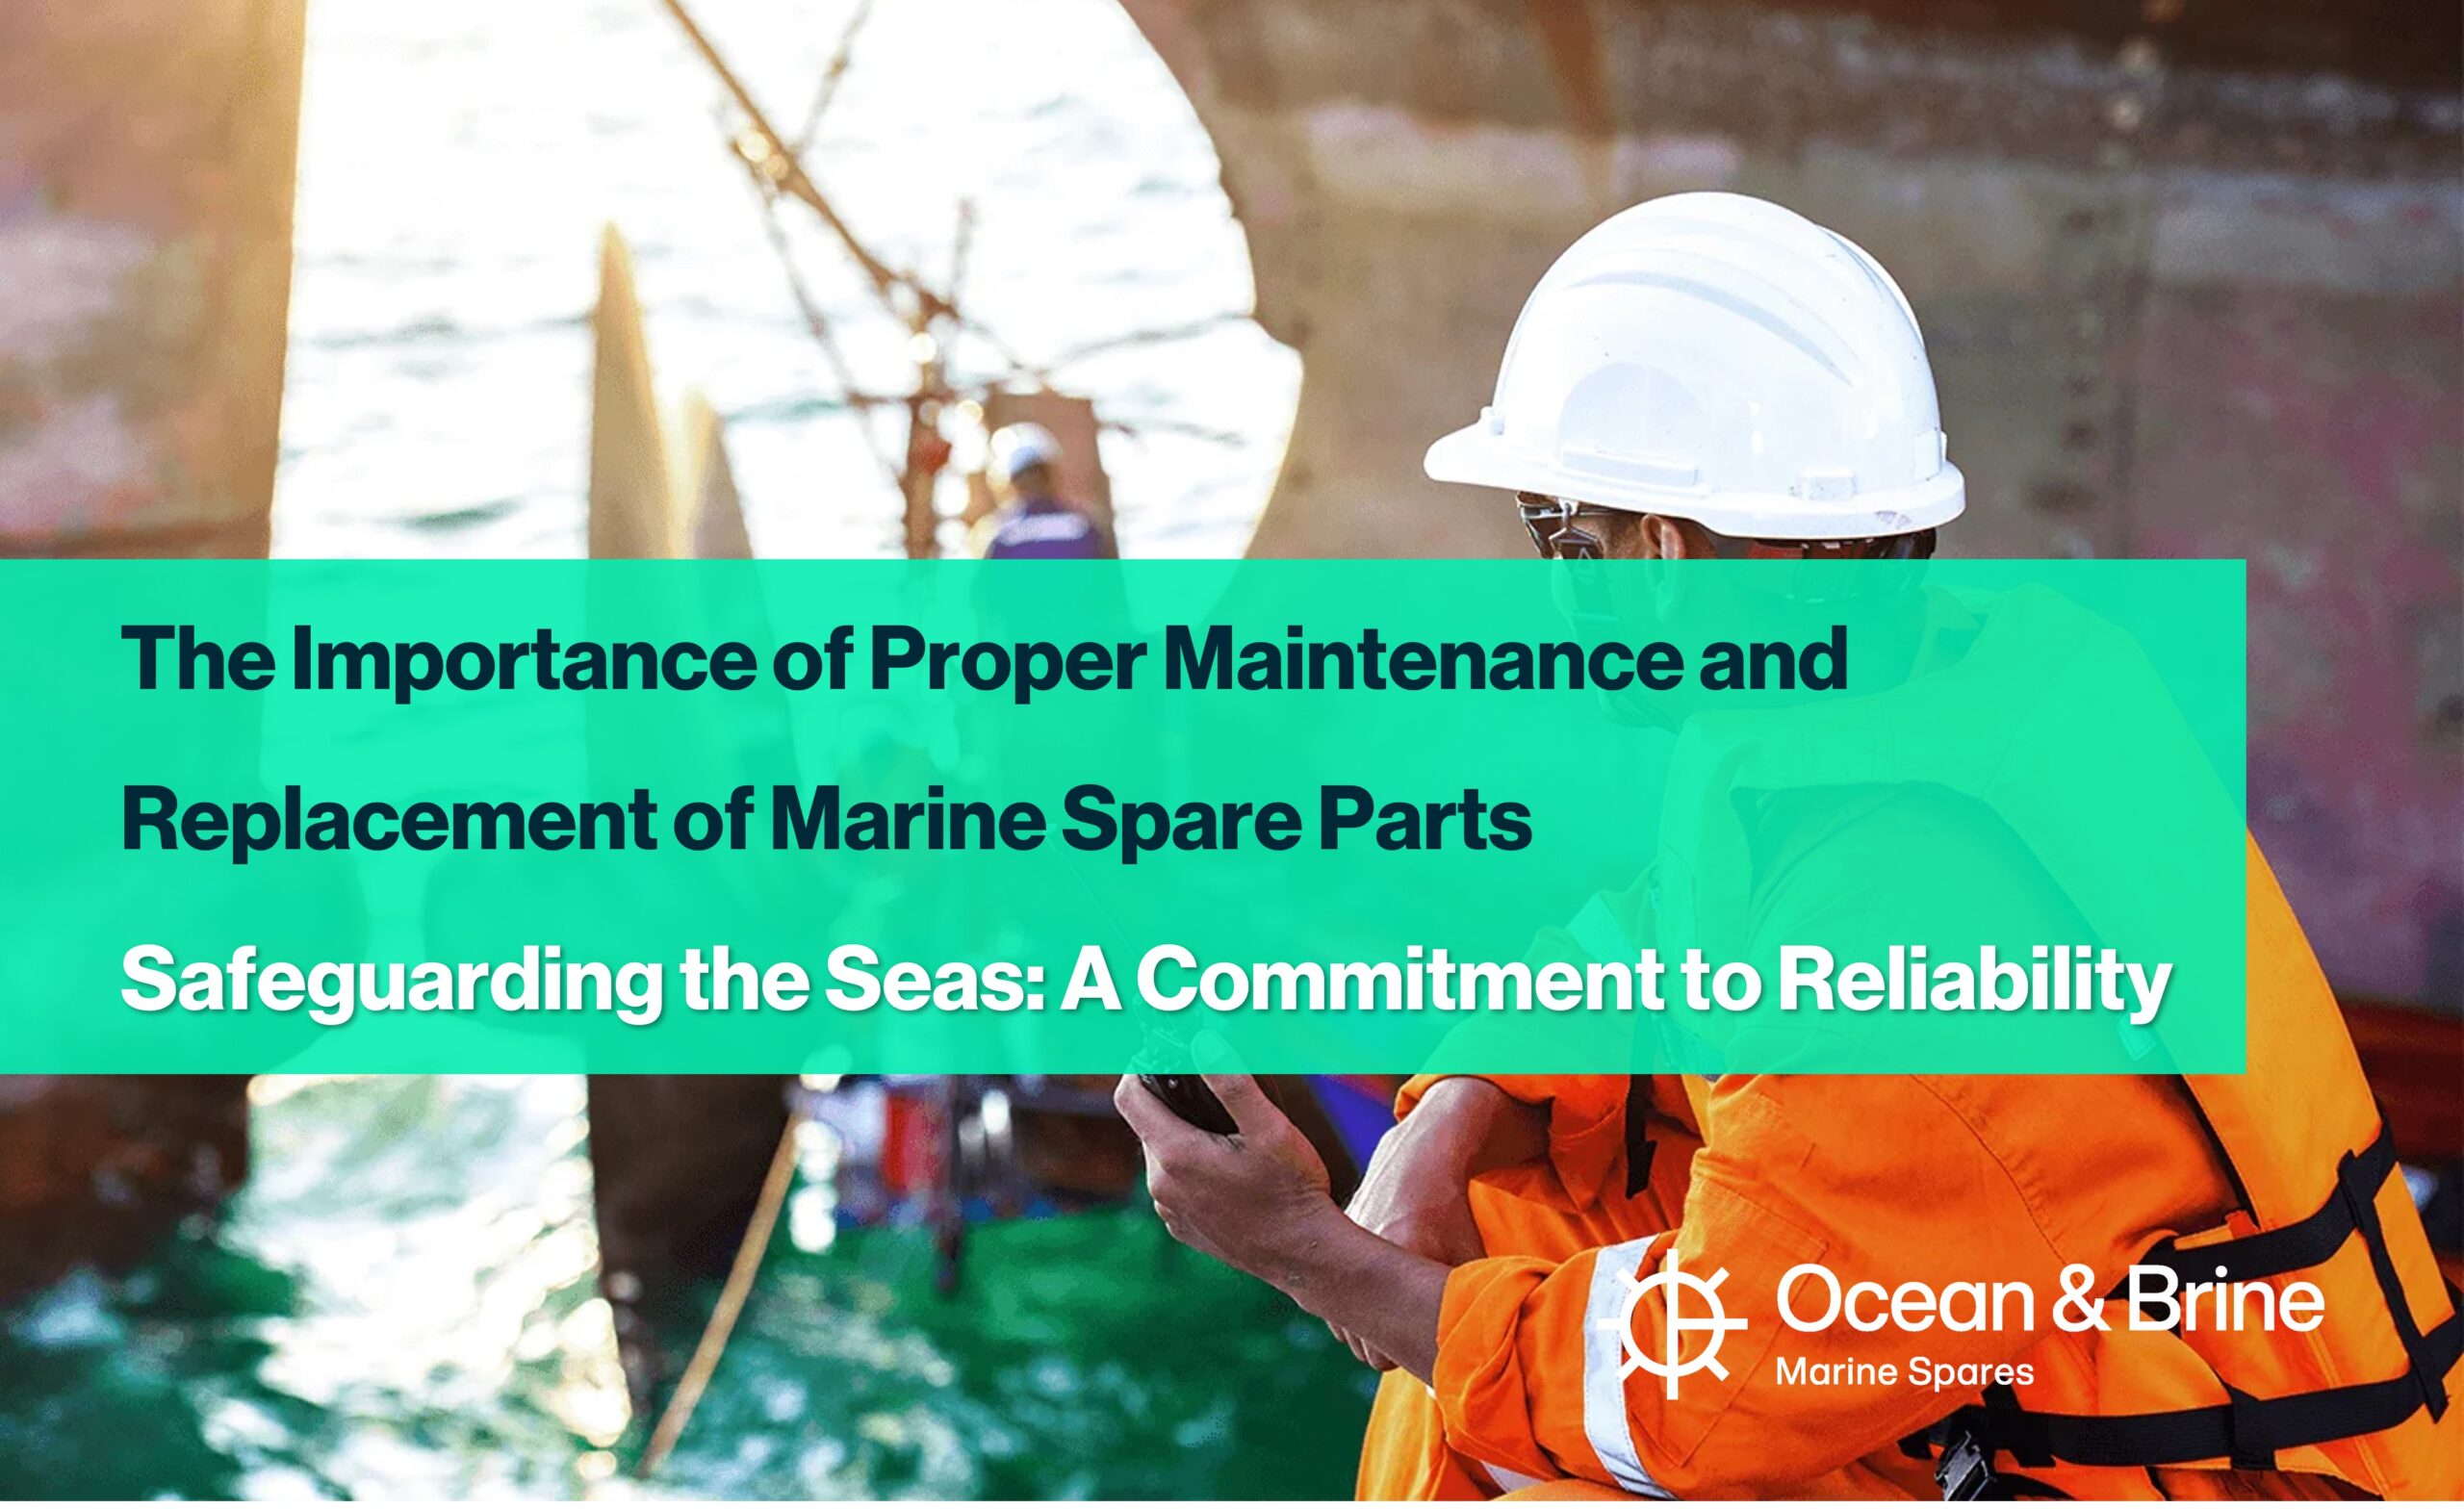 The Importance of Proper Maintenance and Replacement of Marine Spare Parts Safeguarding the Seas A Commitment to Reliability